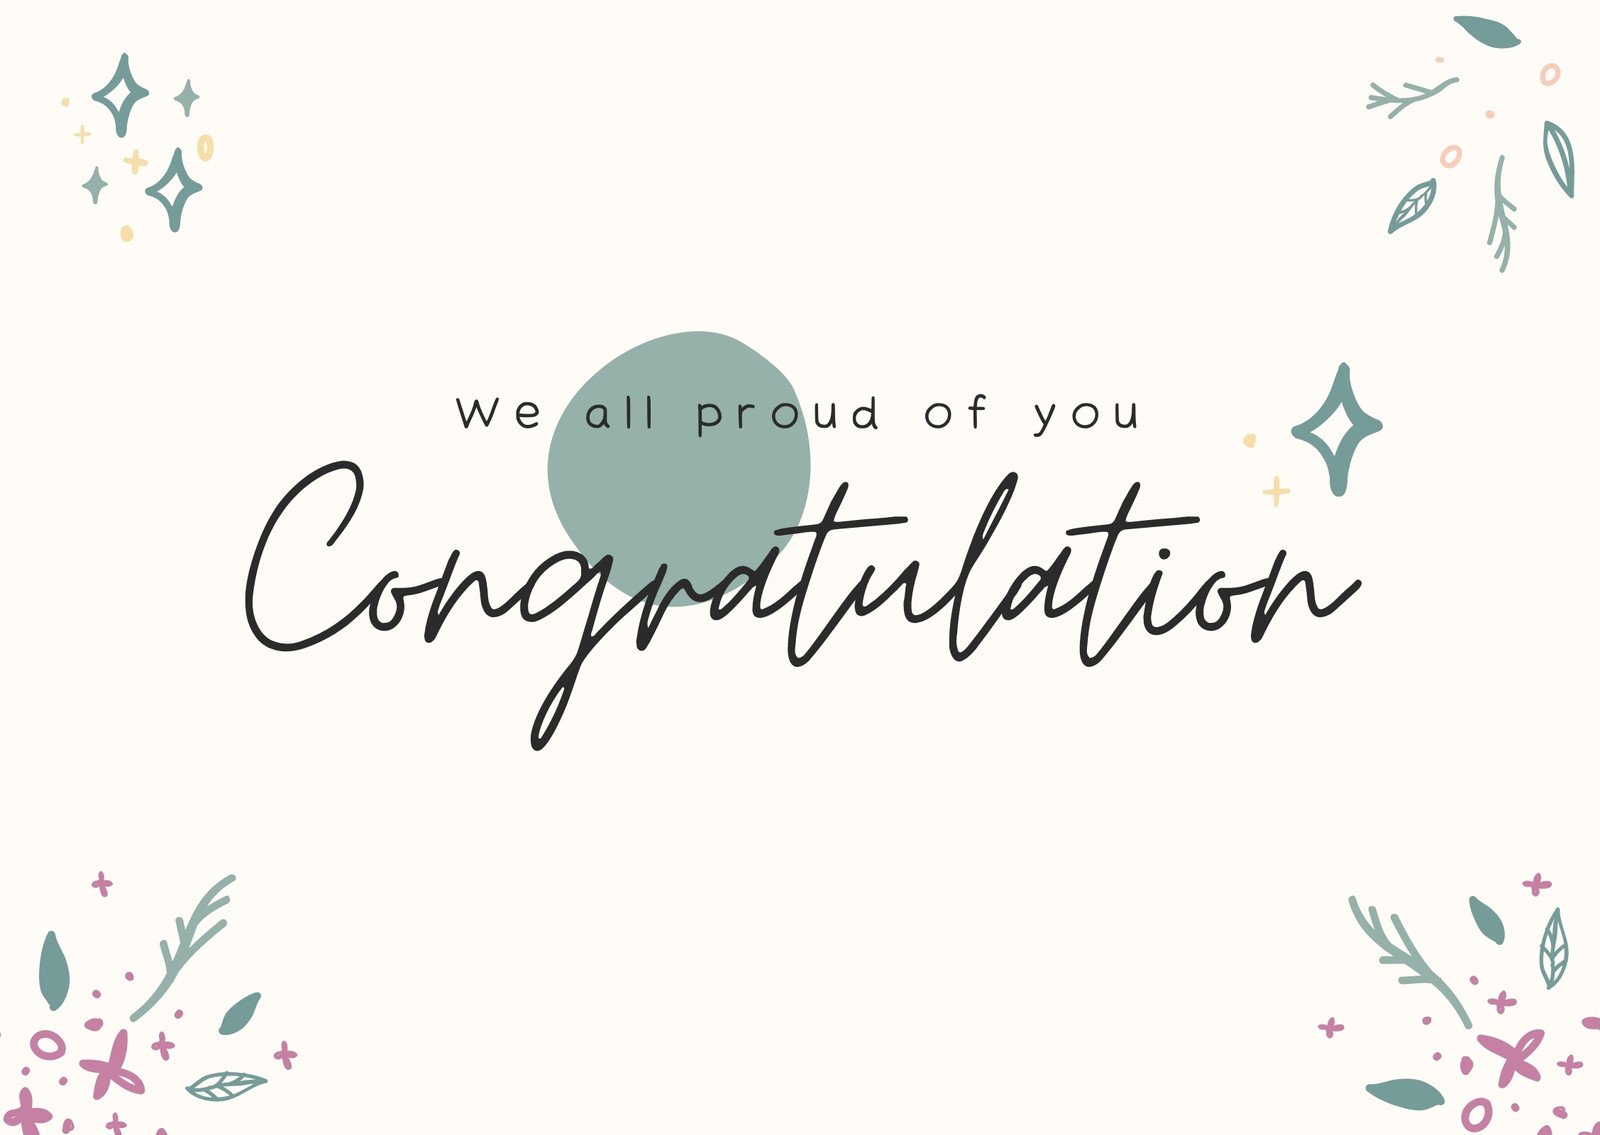 Free and customizable congratulations templates